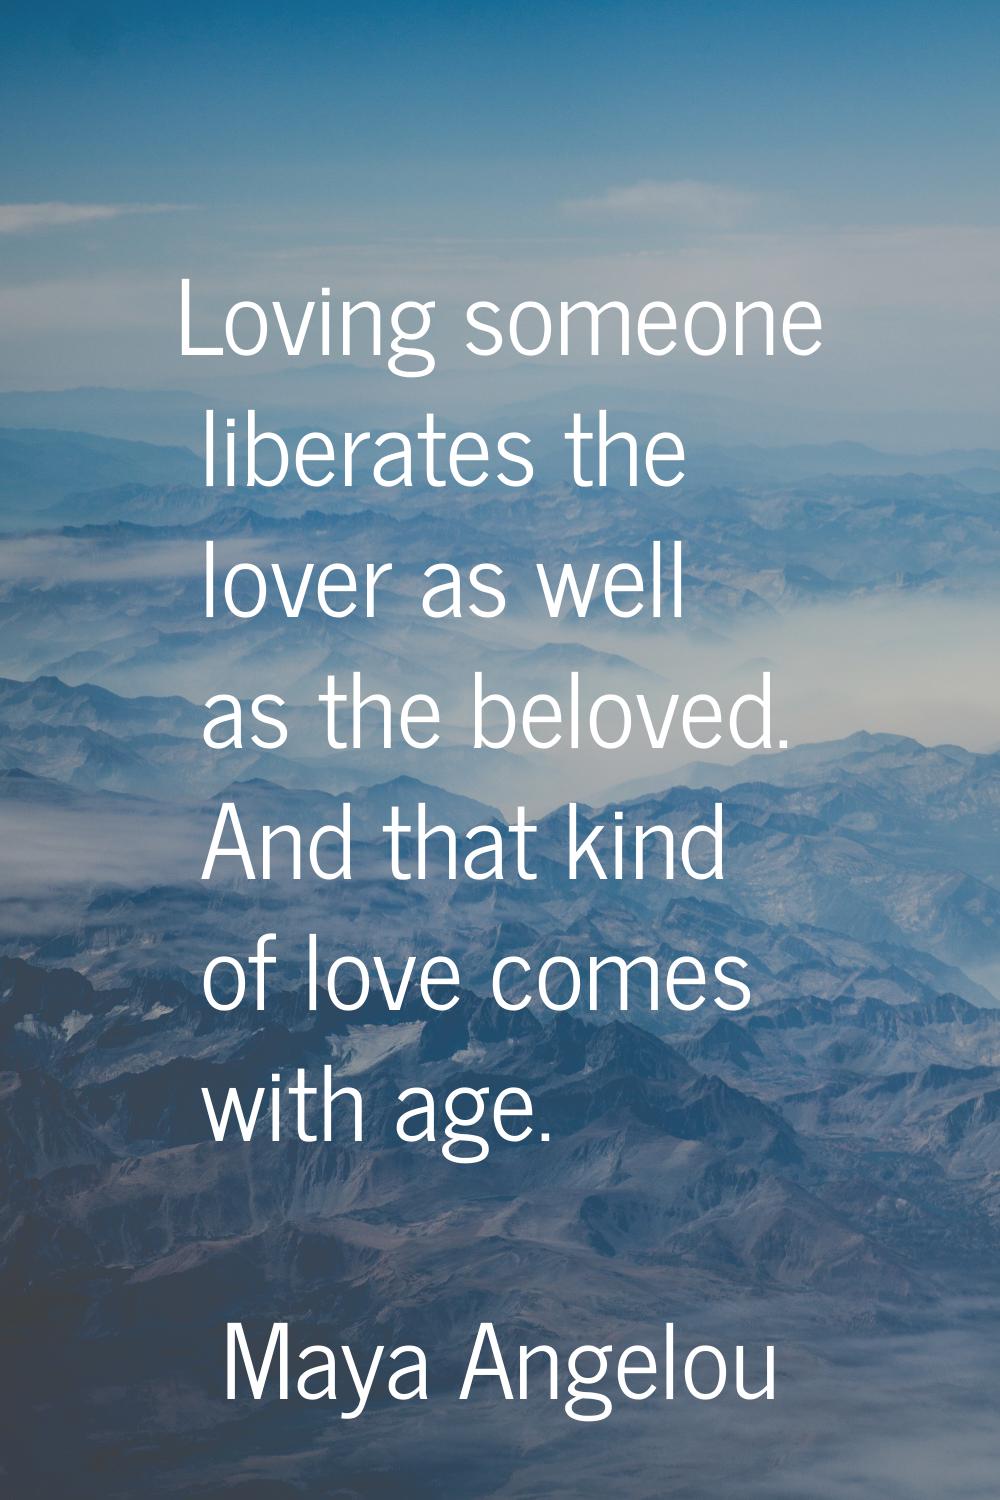 Loving someone liberates the lover as well as the beloved. And that kind of love comes with age.